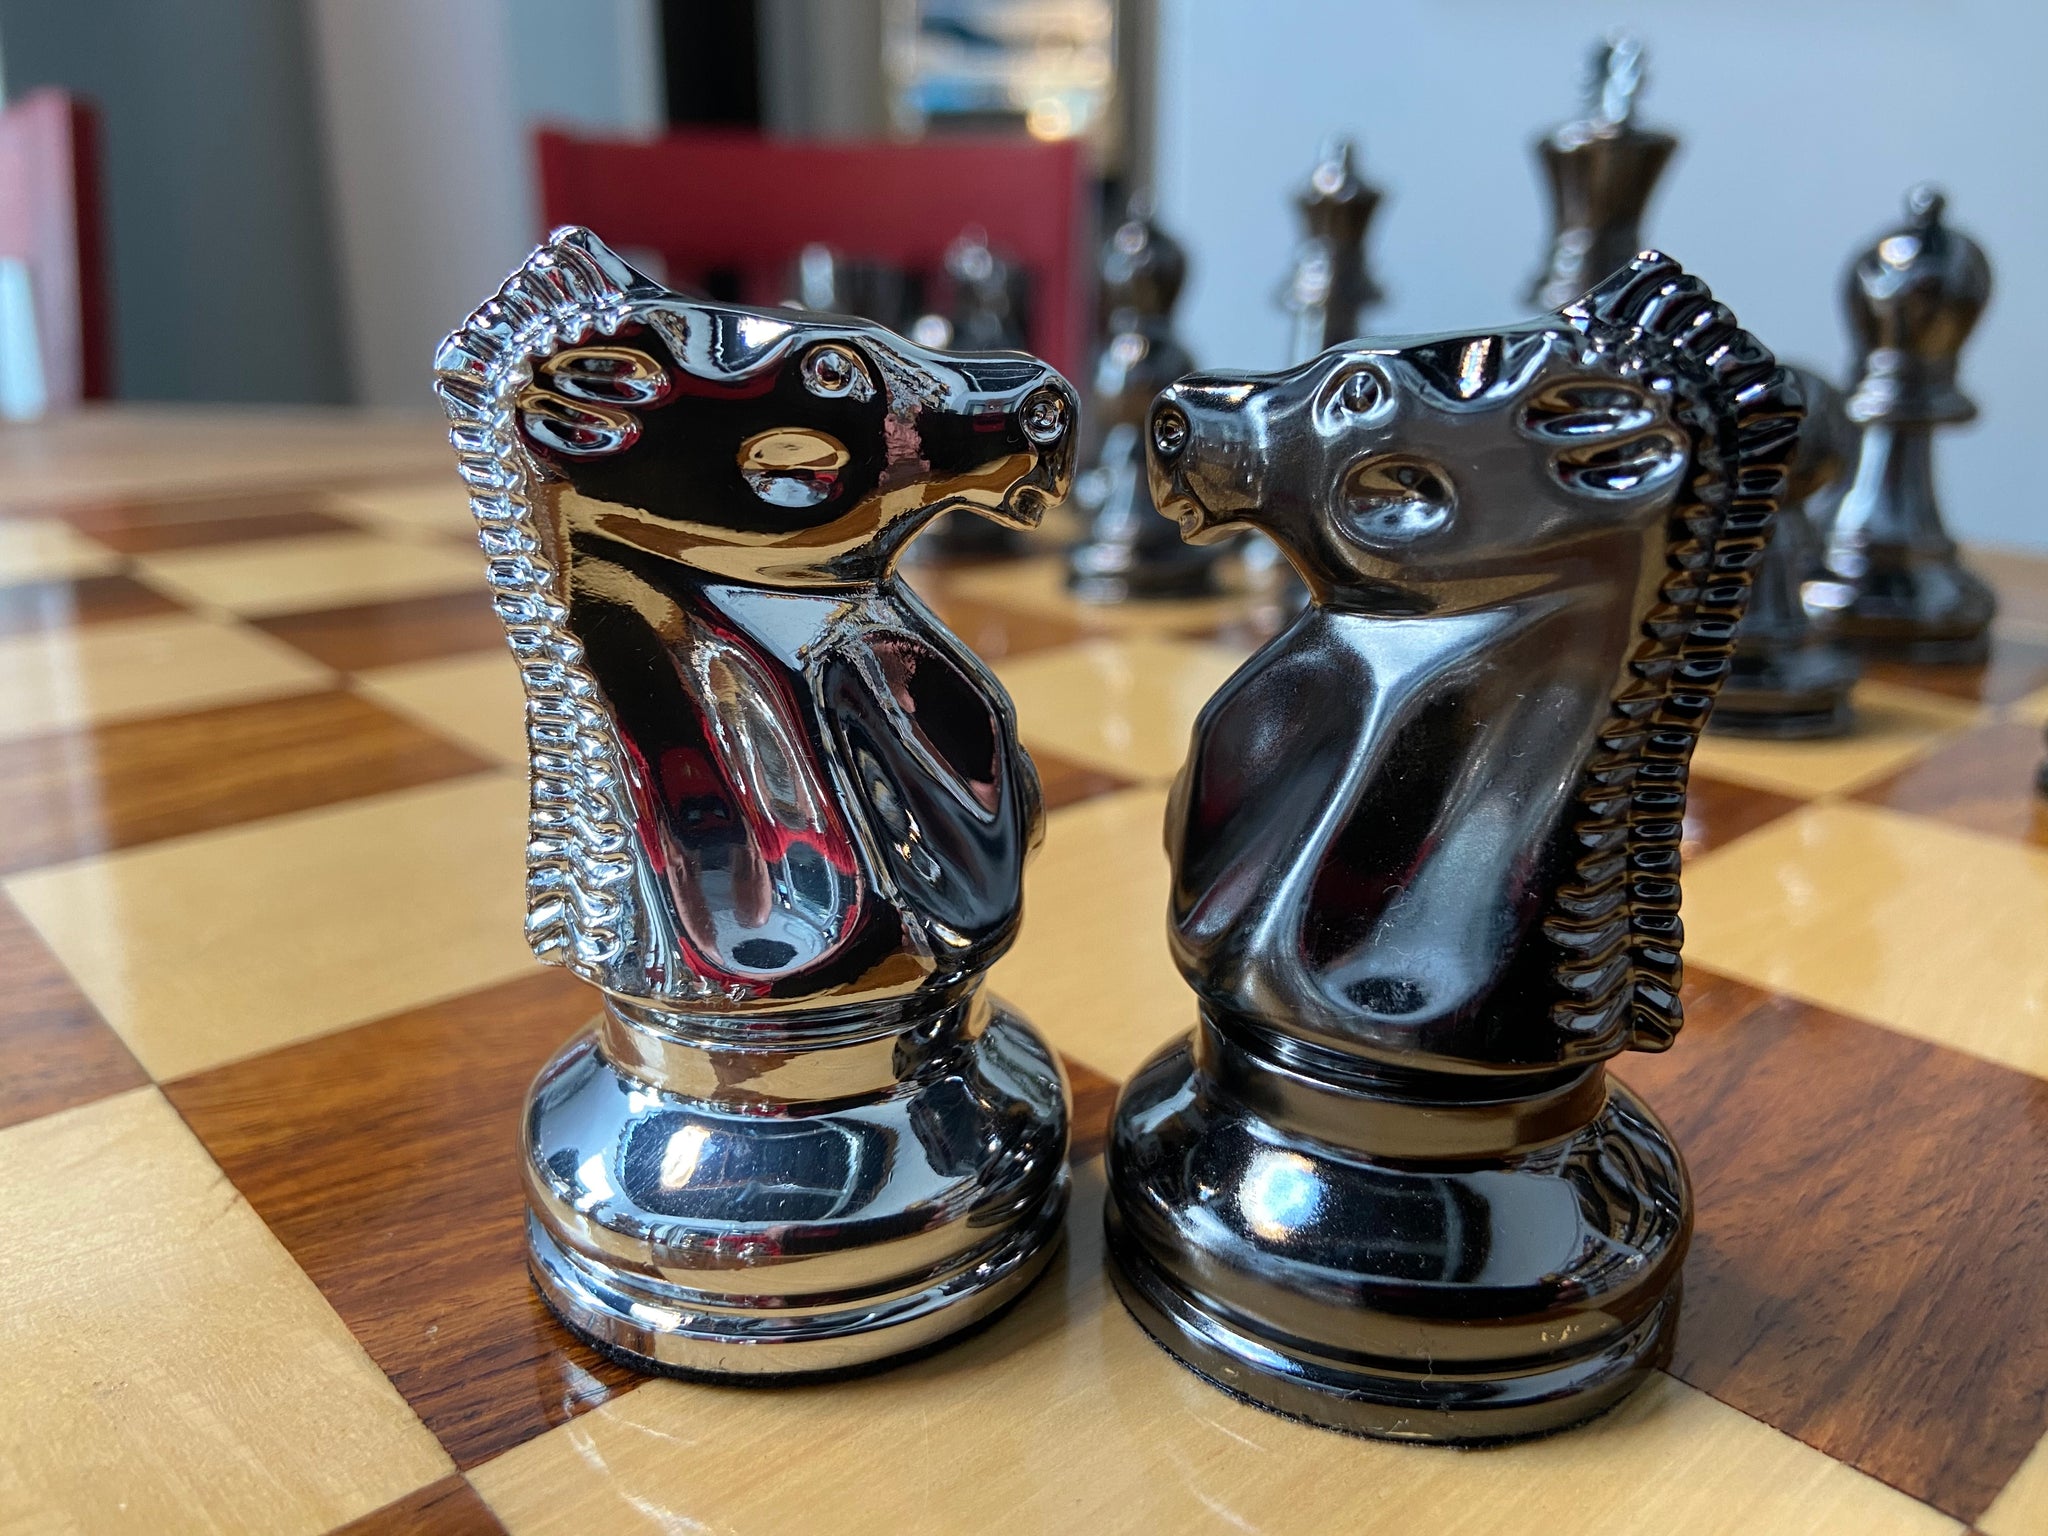 BOBBY FISCHER® Metal Ultimate Chess Pieces - 3.75 inch King - Weighs over  9.5 lbs